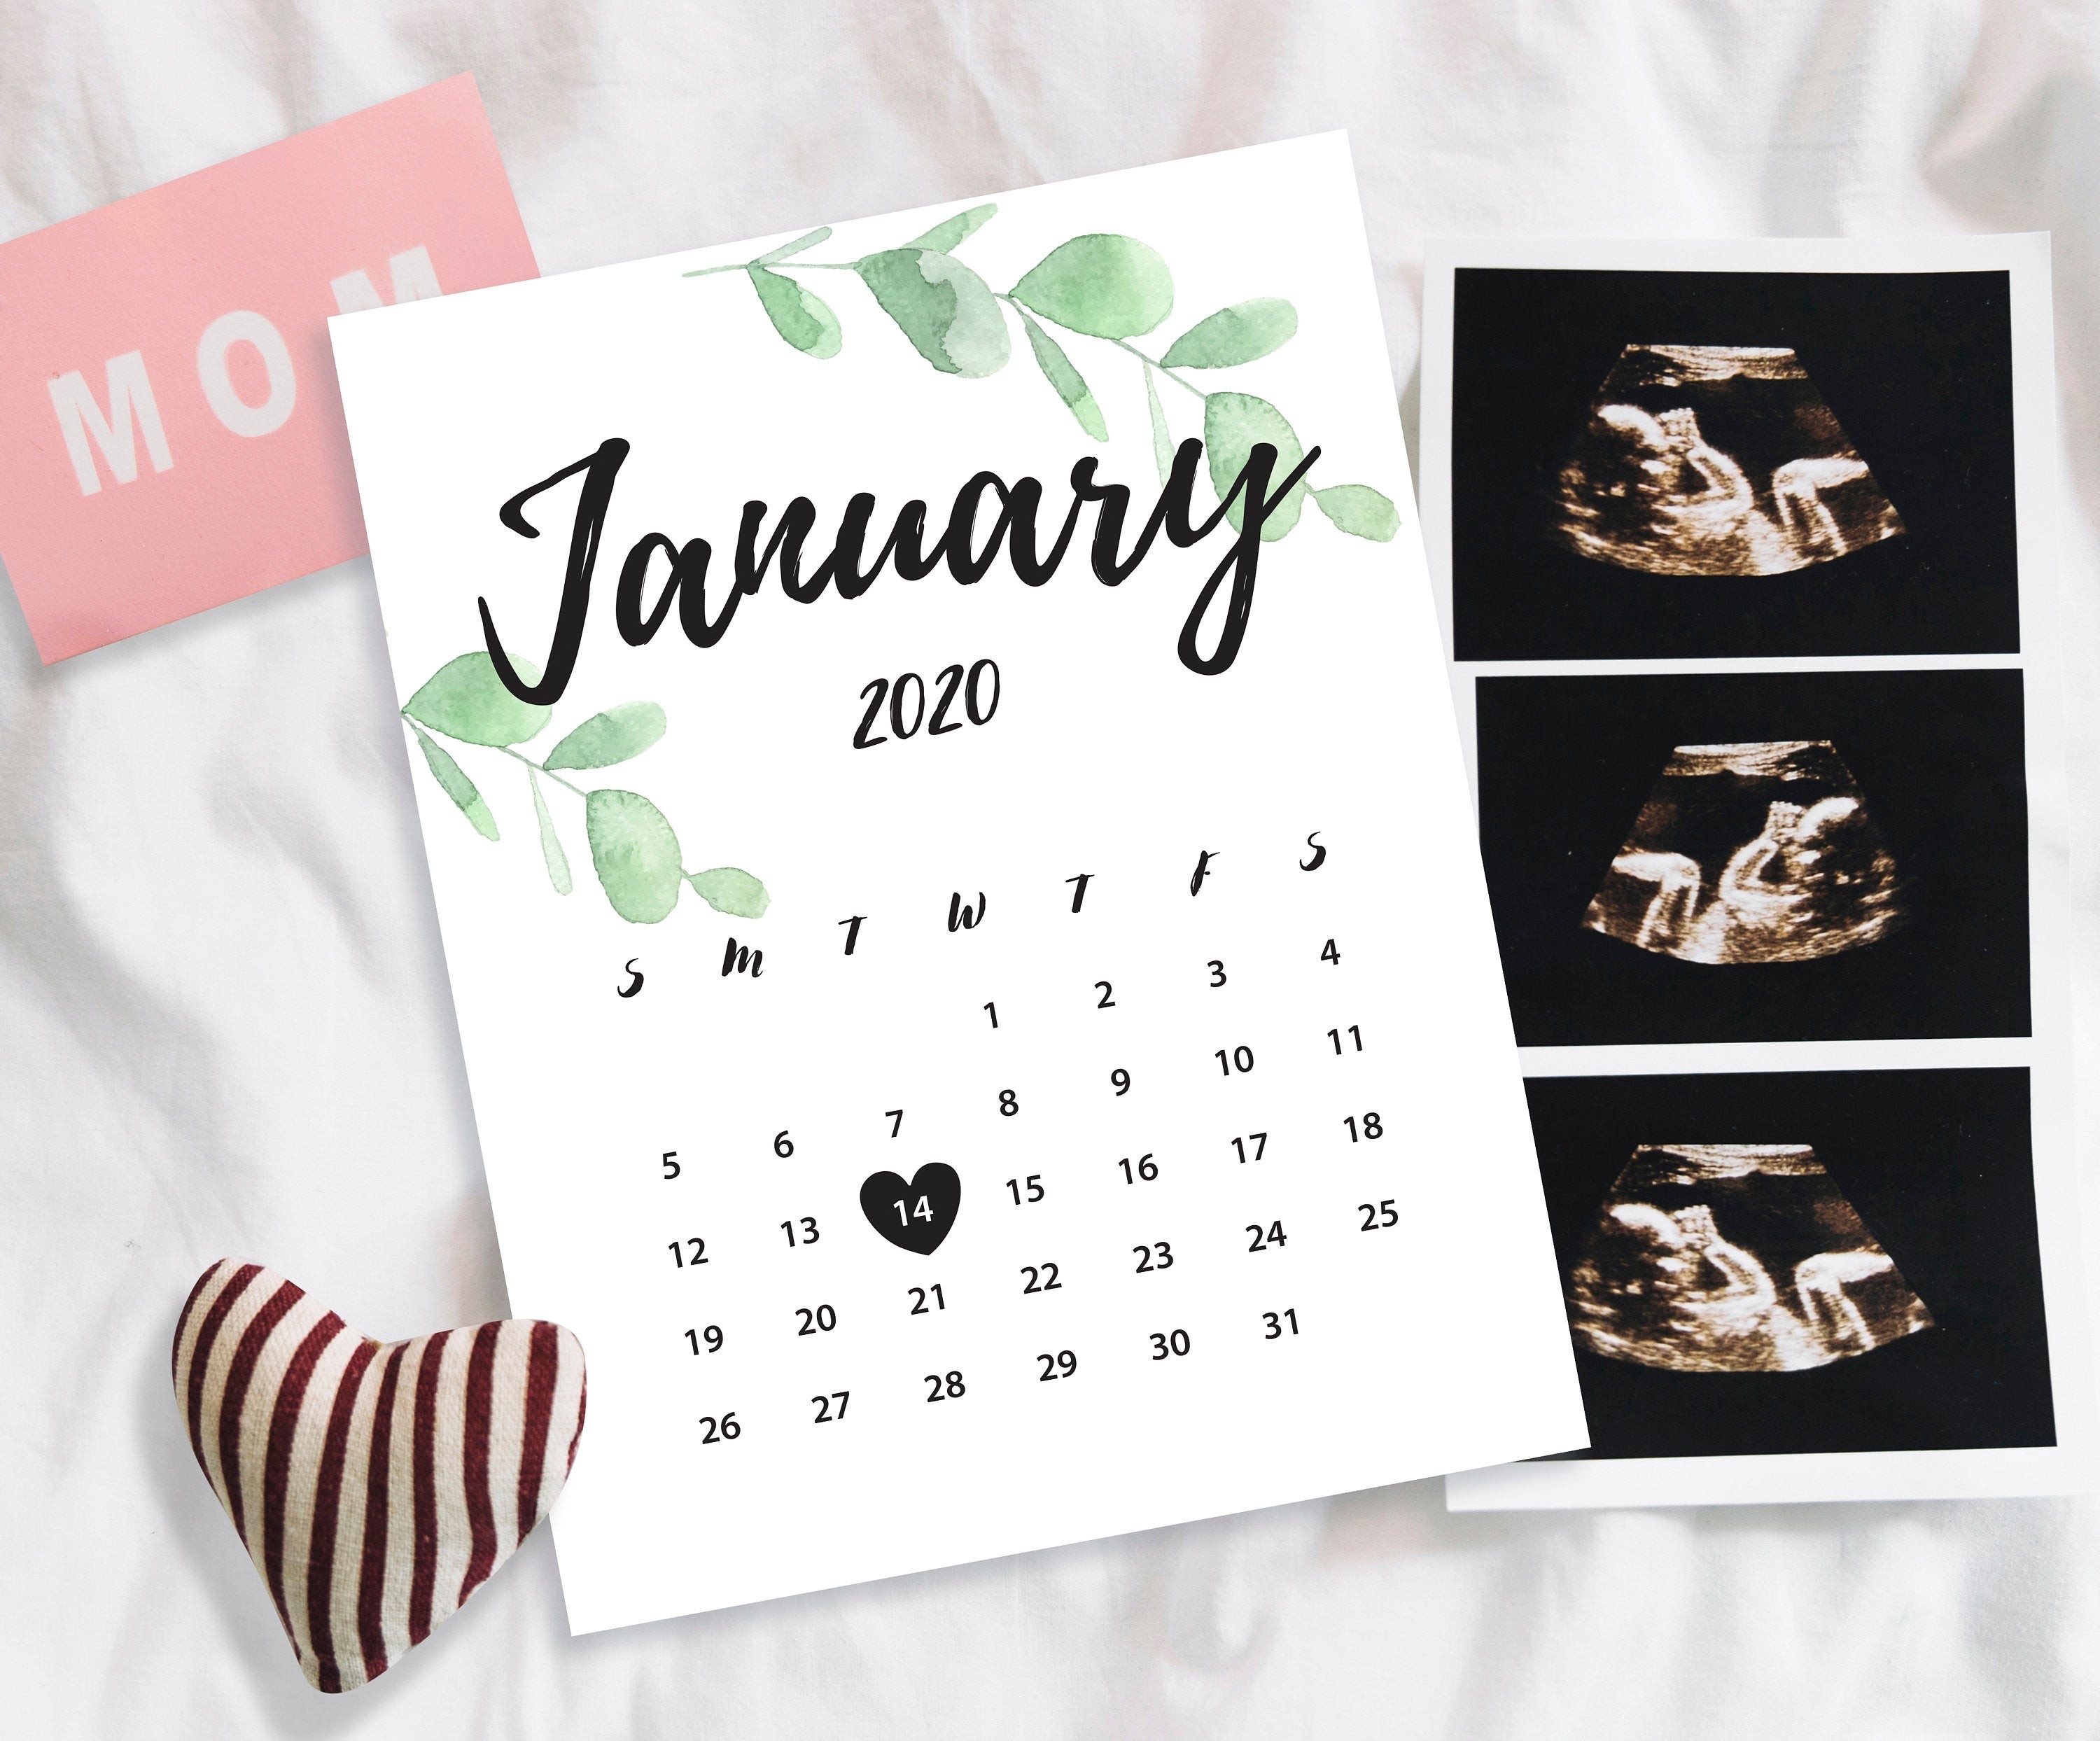 Personalized January 2020 Pregnancy Announcement, Baby Due Date Calendar,  Social Mediа, Expecting In 2020, Birthday Printable Calendar-January 2020 Calendar Baby Announcement